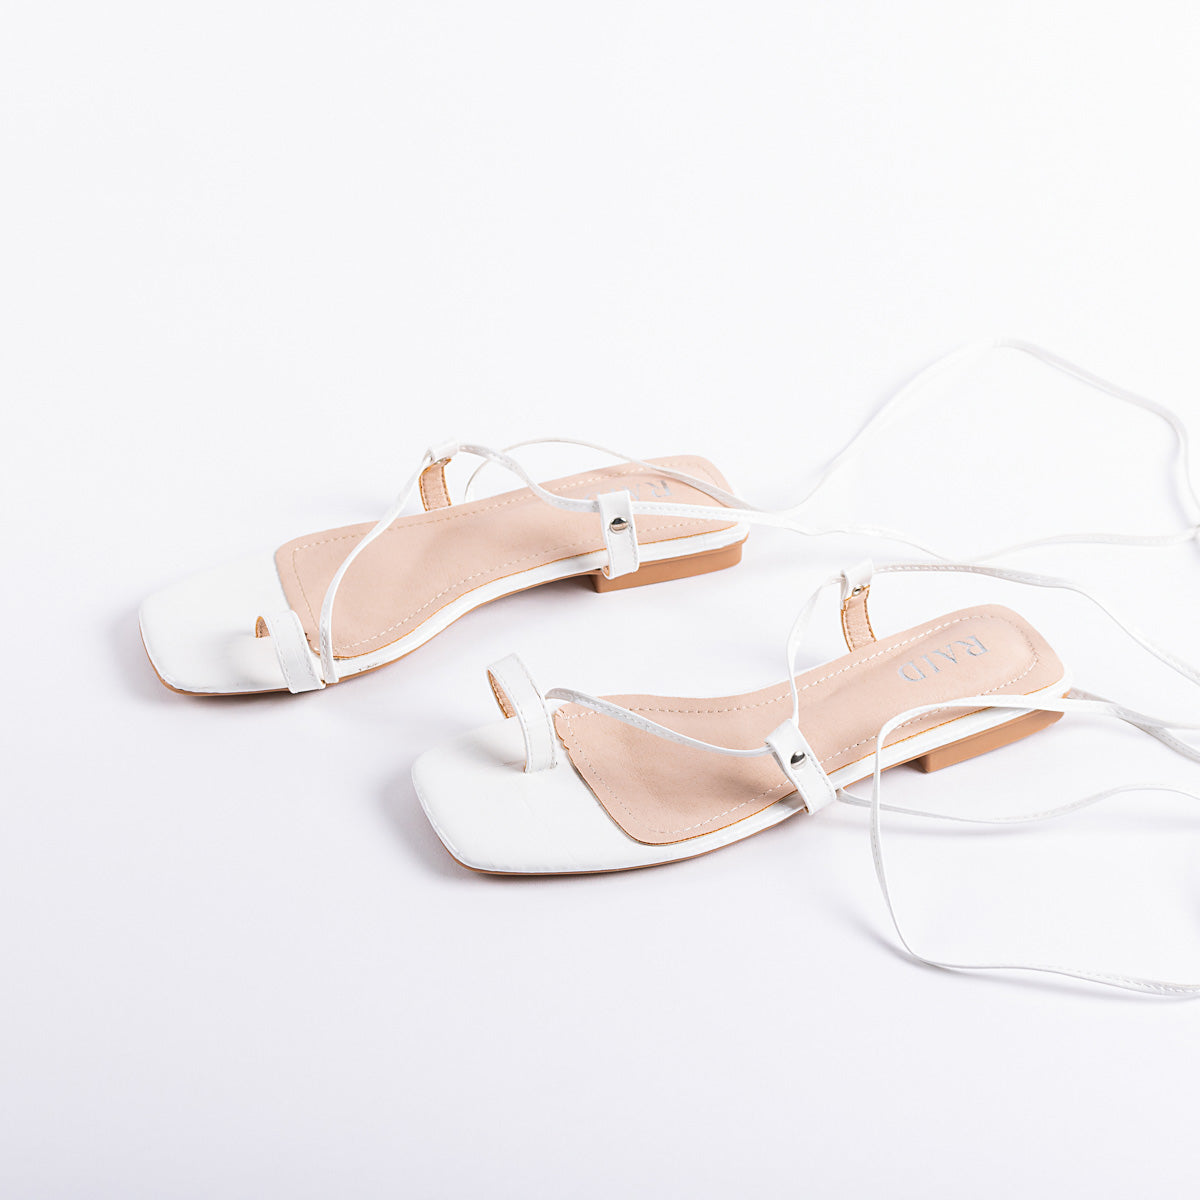 RAID Adaze Lace up Sandal in White